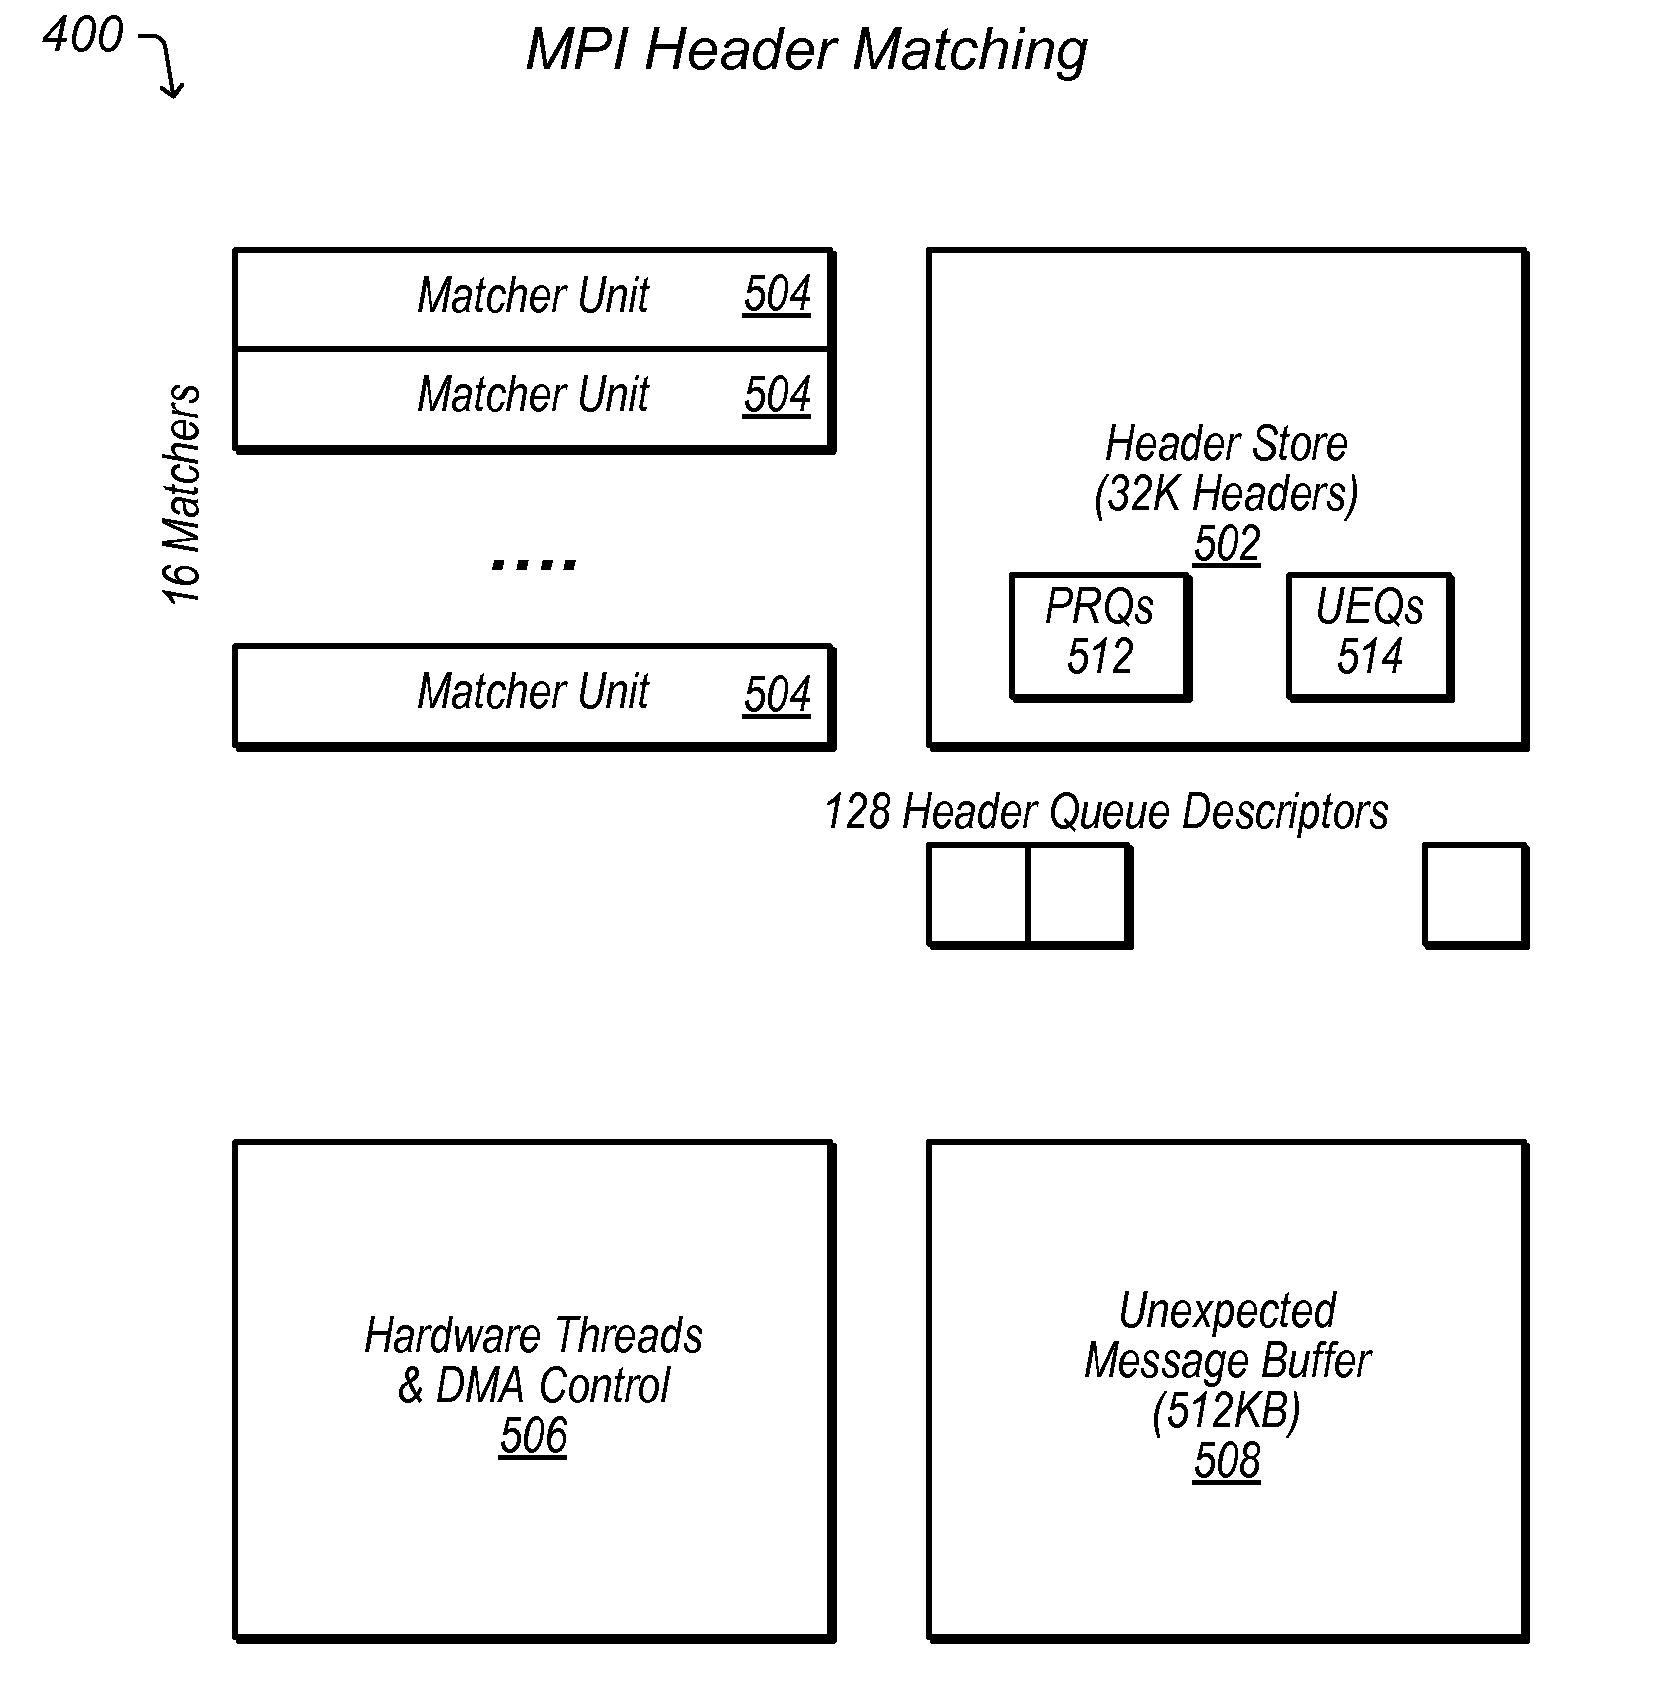 Scalable interface for connecting multiple computer systems which performs parallel MPI header matching